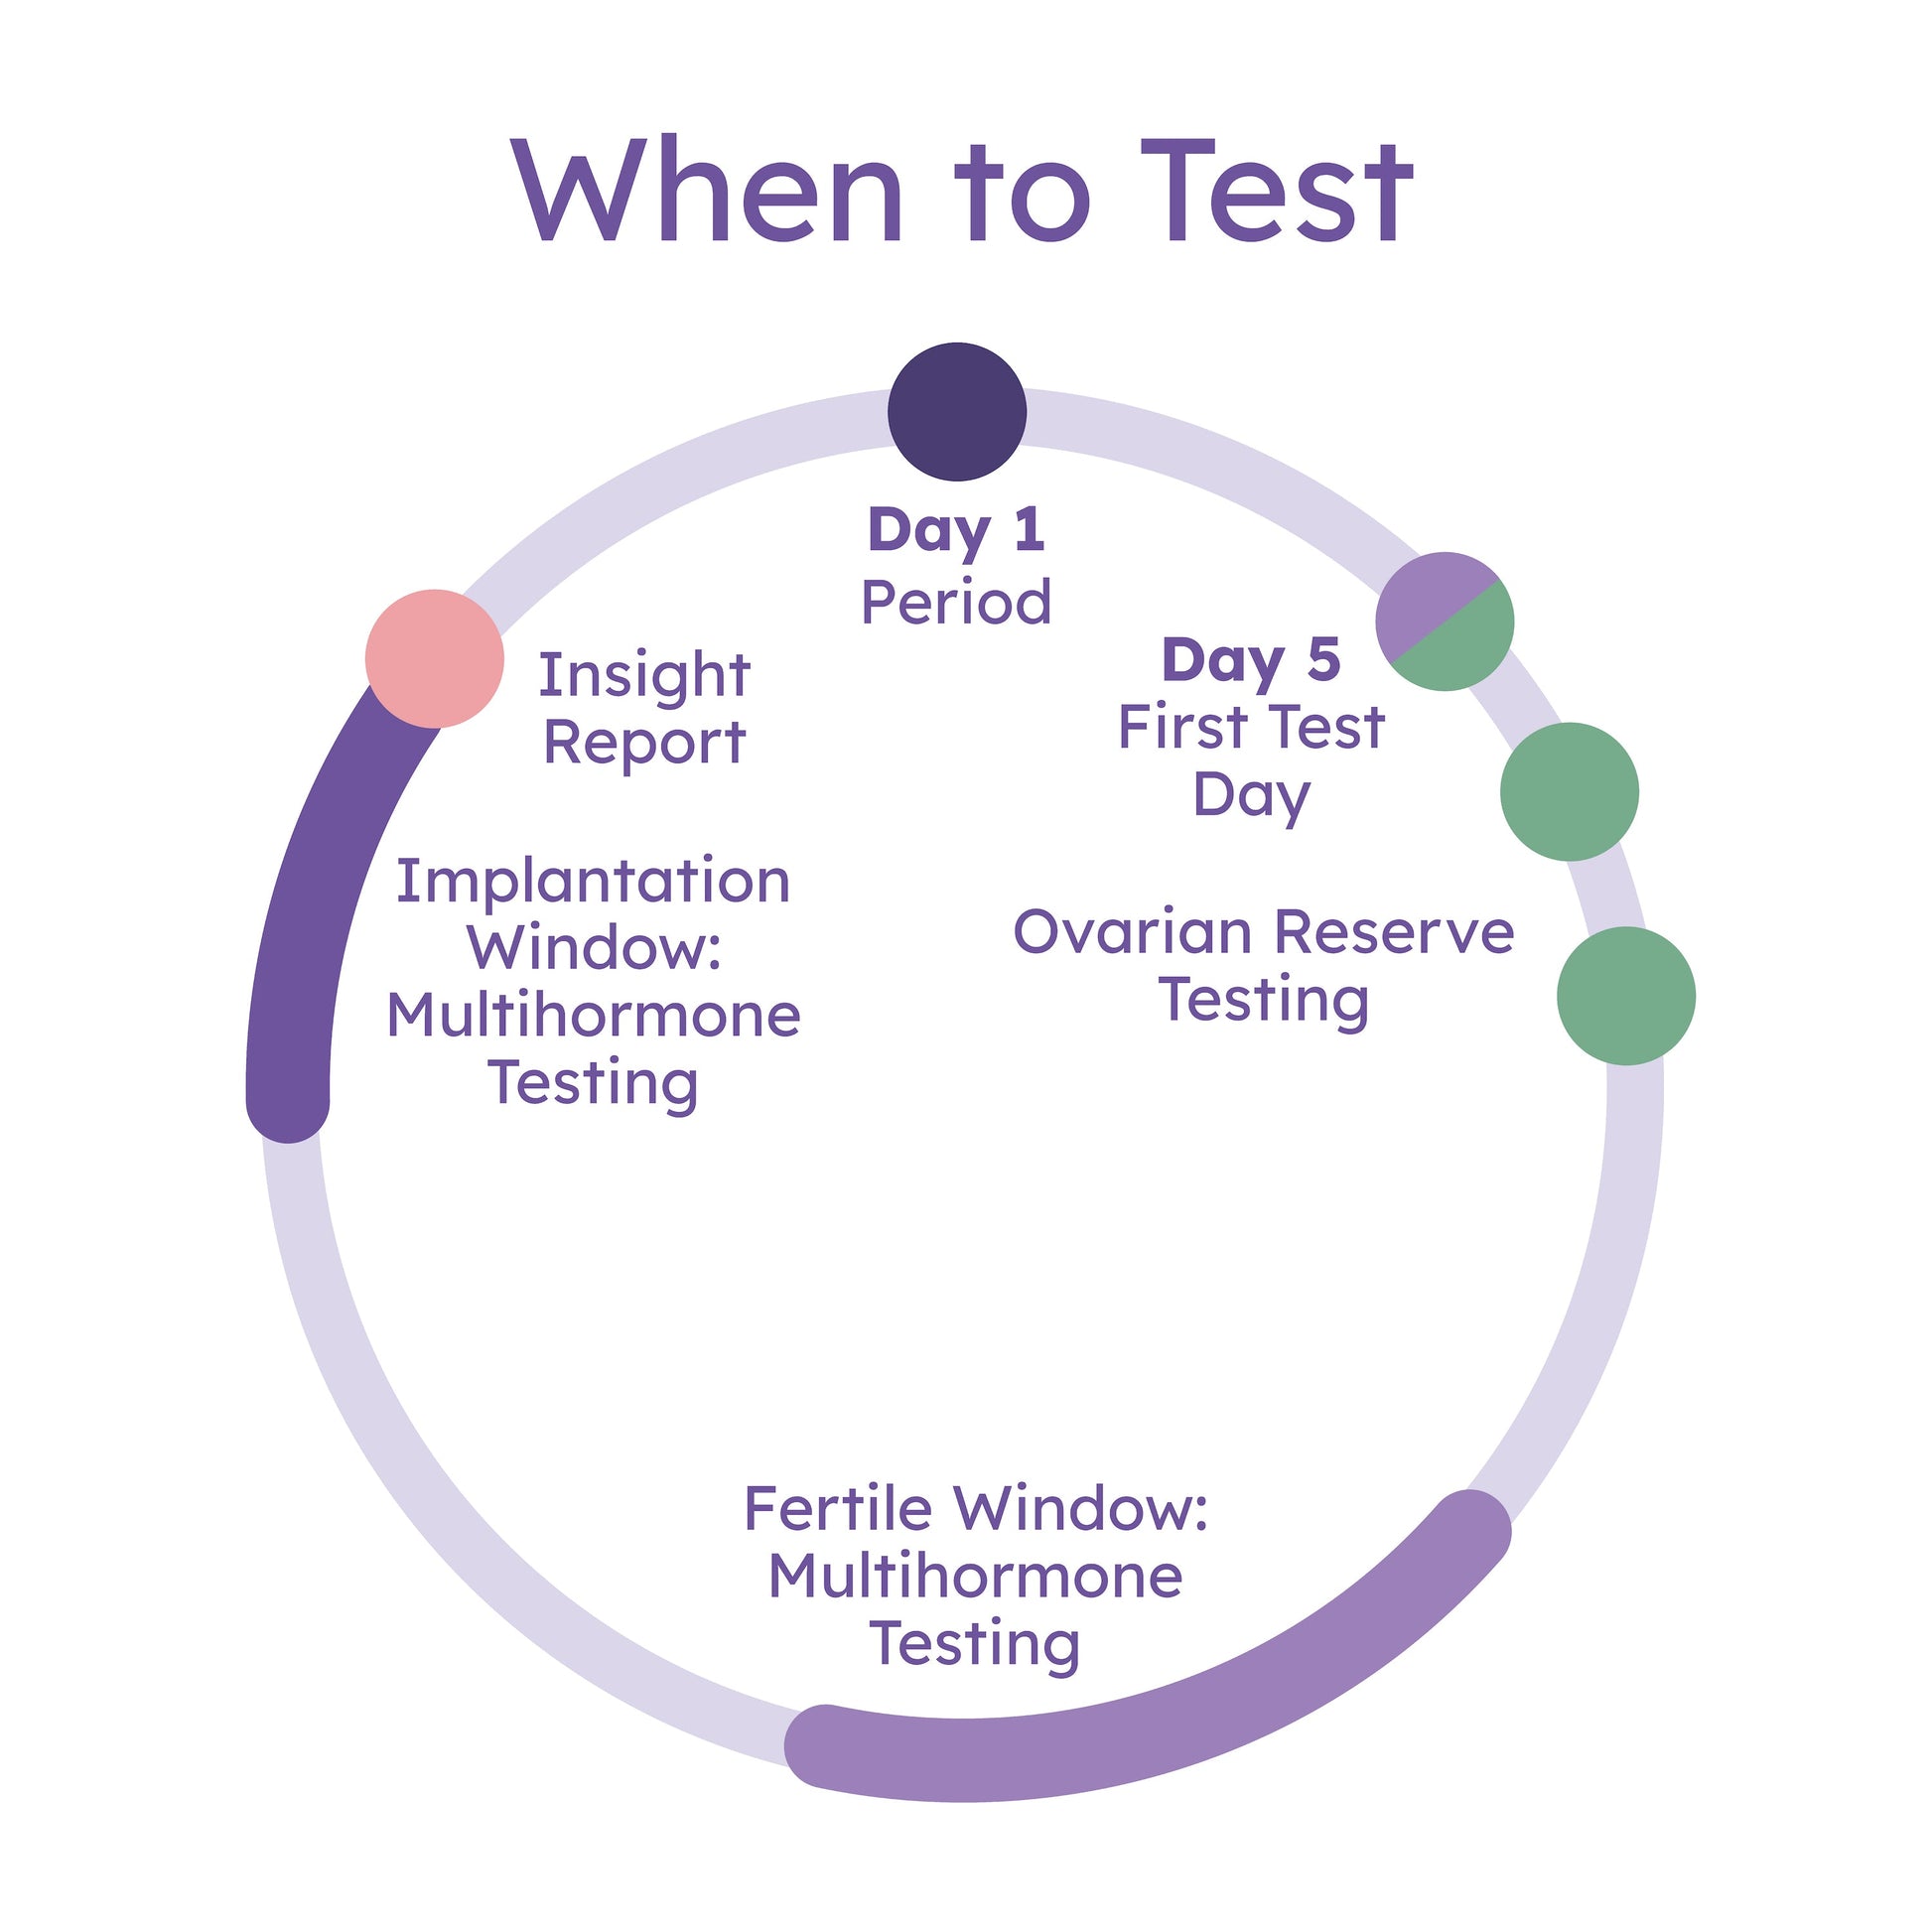 Proov Complete Fertility Insight - When to test?